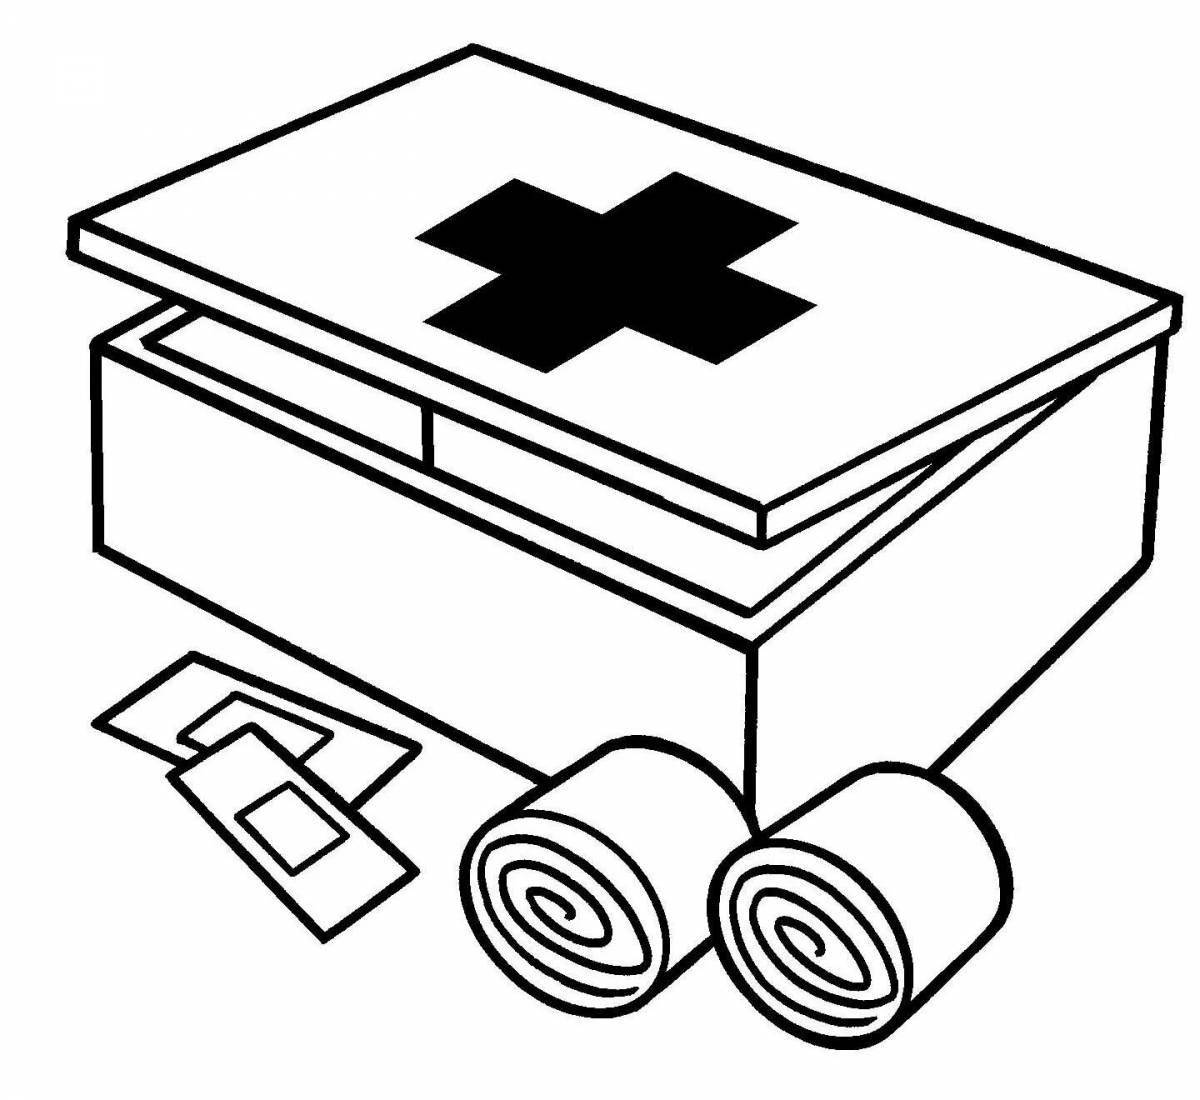 Colorful first aid kit coloring page